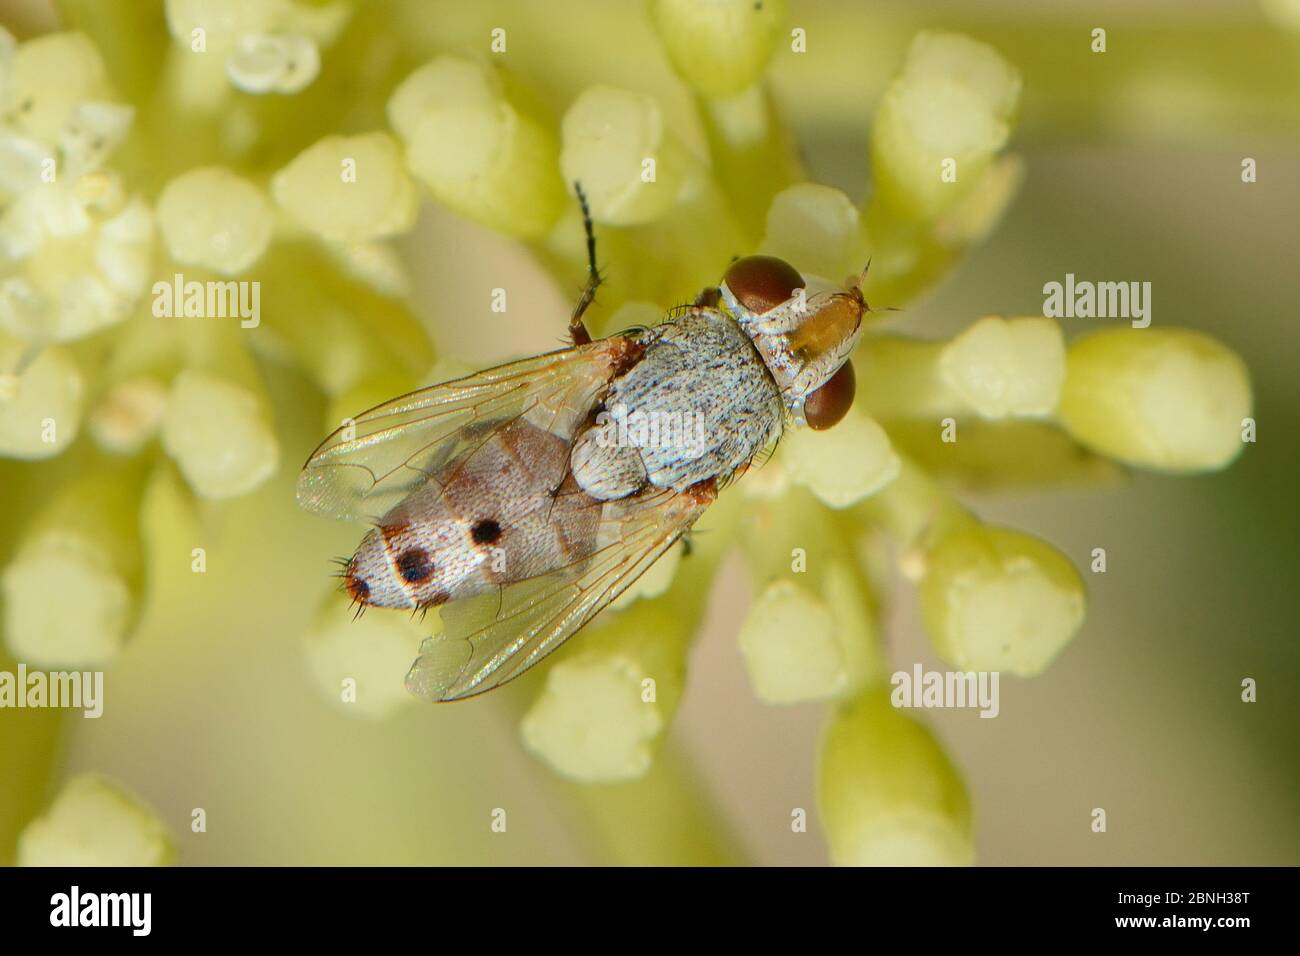 Satellite fly (Craticulina sp.), a kleptoparasite of sand wasps, feeding on Rock samphire flowers (Crithmum maritimum) on a sandy beach close to sever Stock Photo